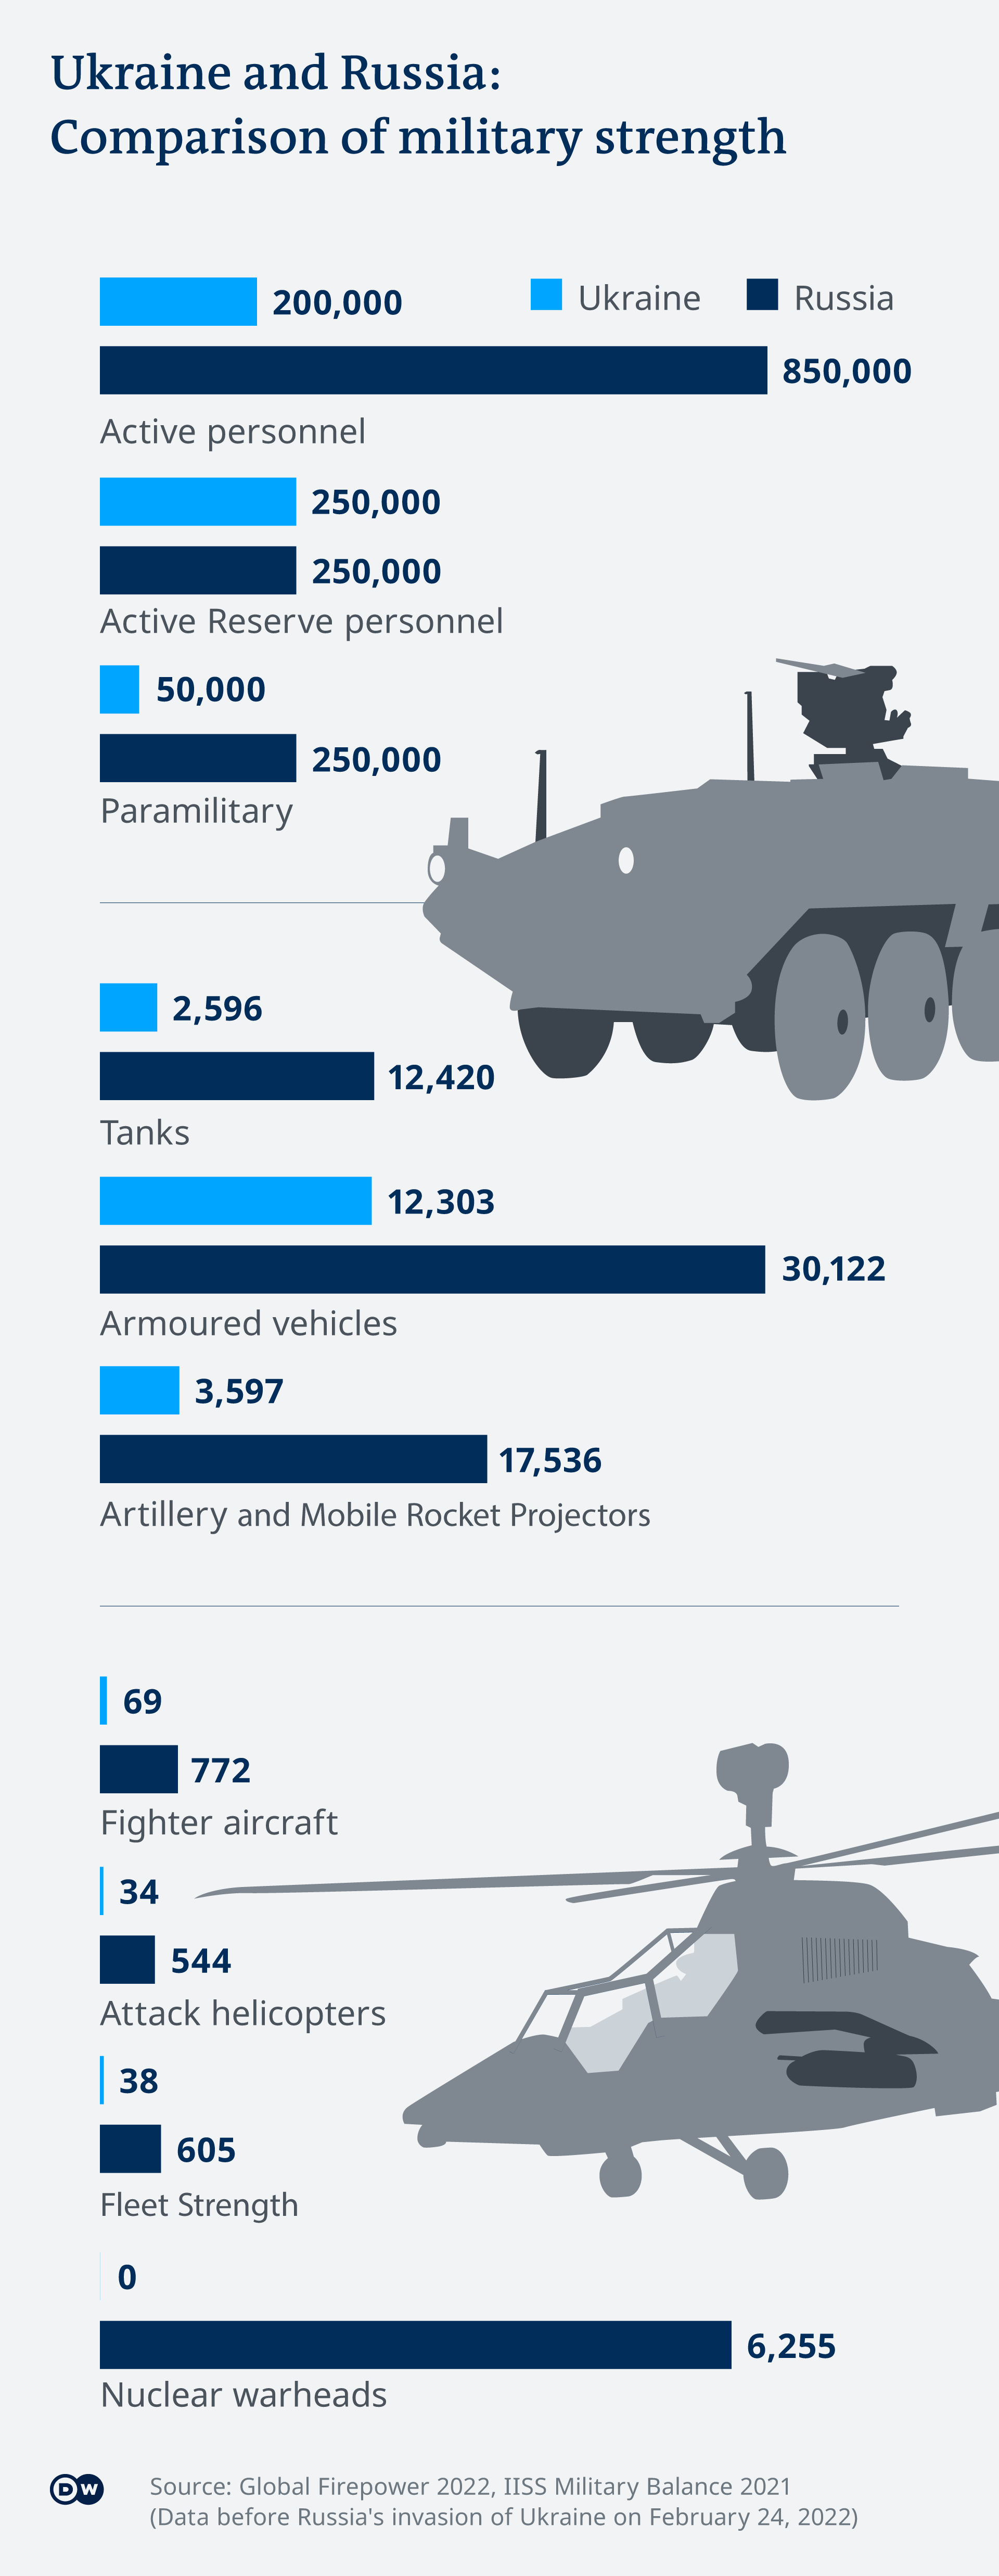 A chart comparing the military strength of Russia and Ukraine